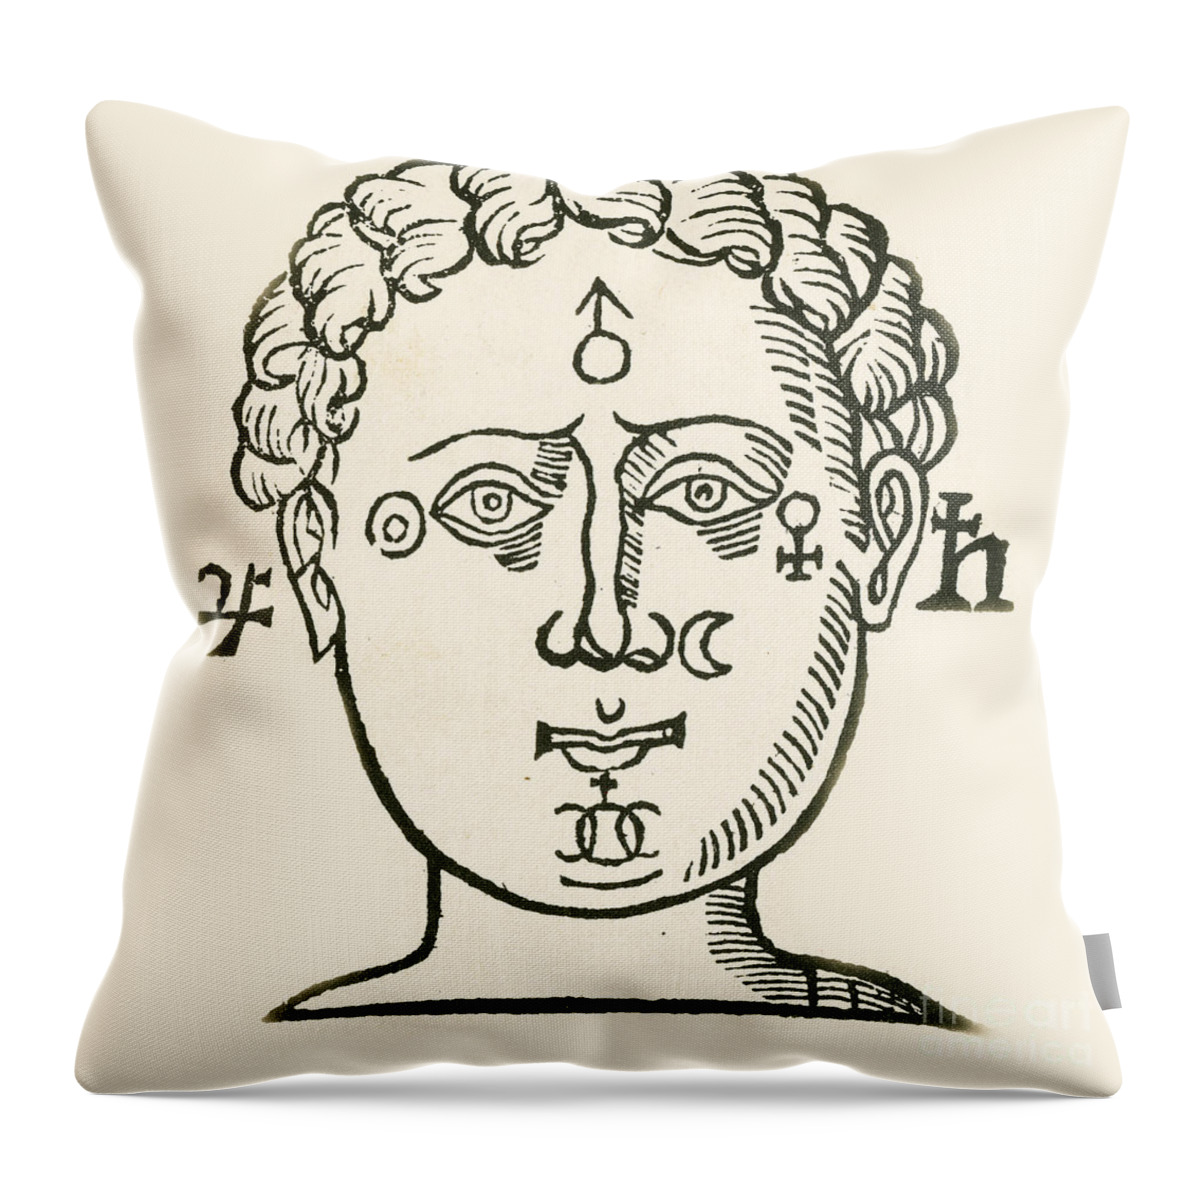 Historic Throw Pillow featuring the photograph Position Of The Planets In The Human by Science Source